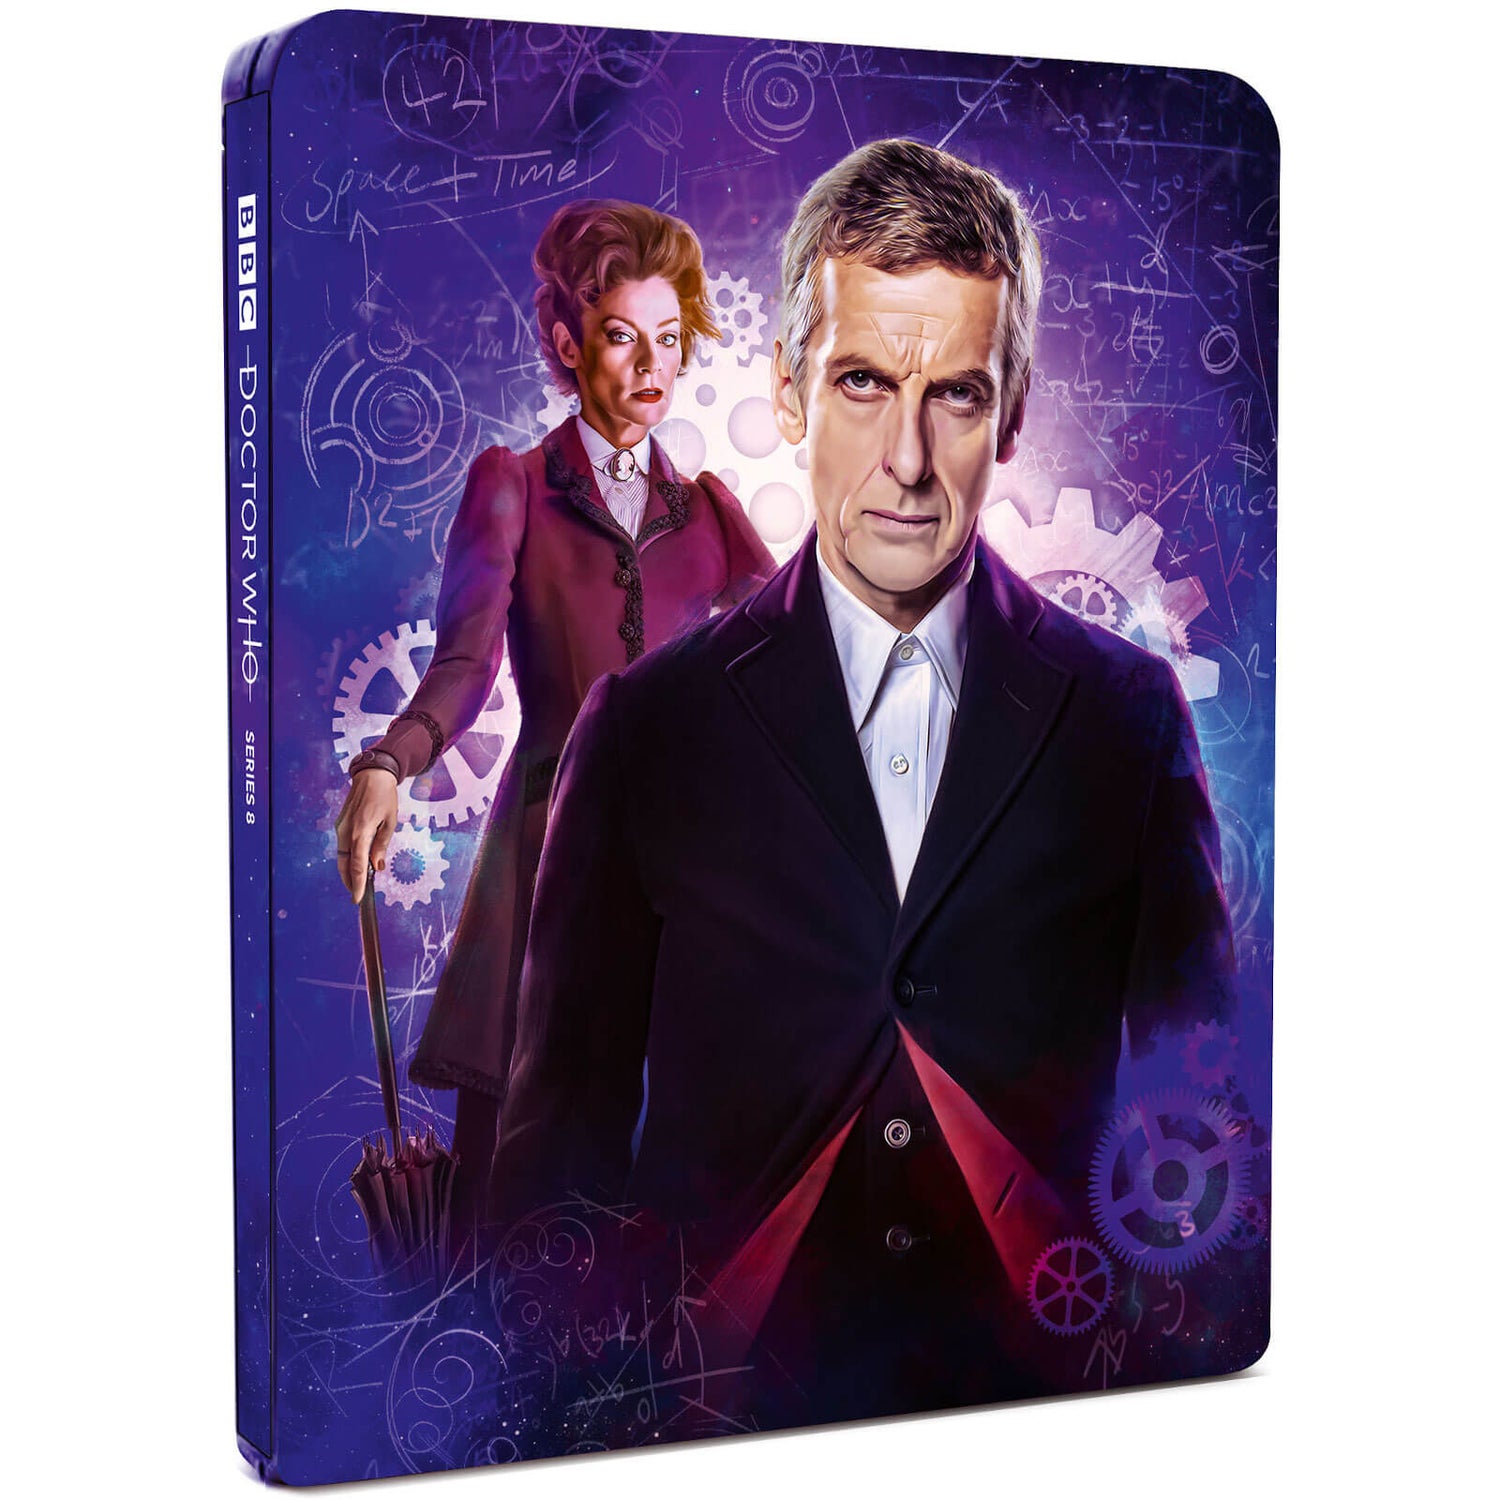 Doctor Who - The Complete Series 8 Steelbook